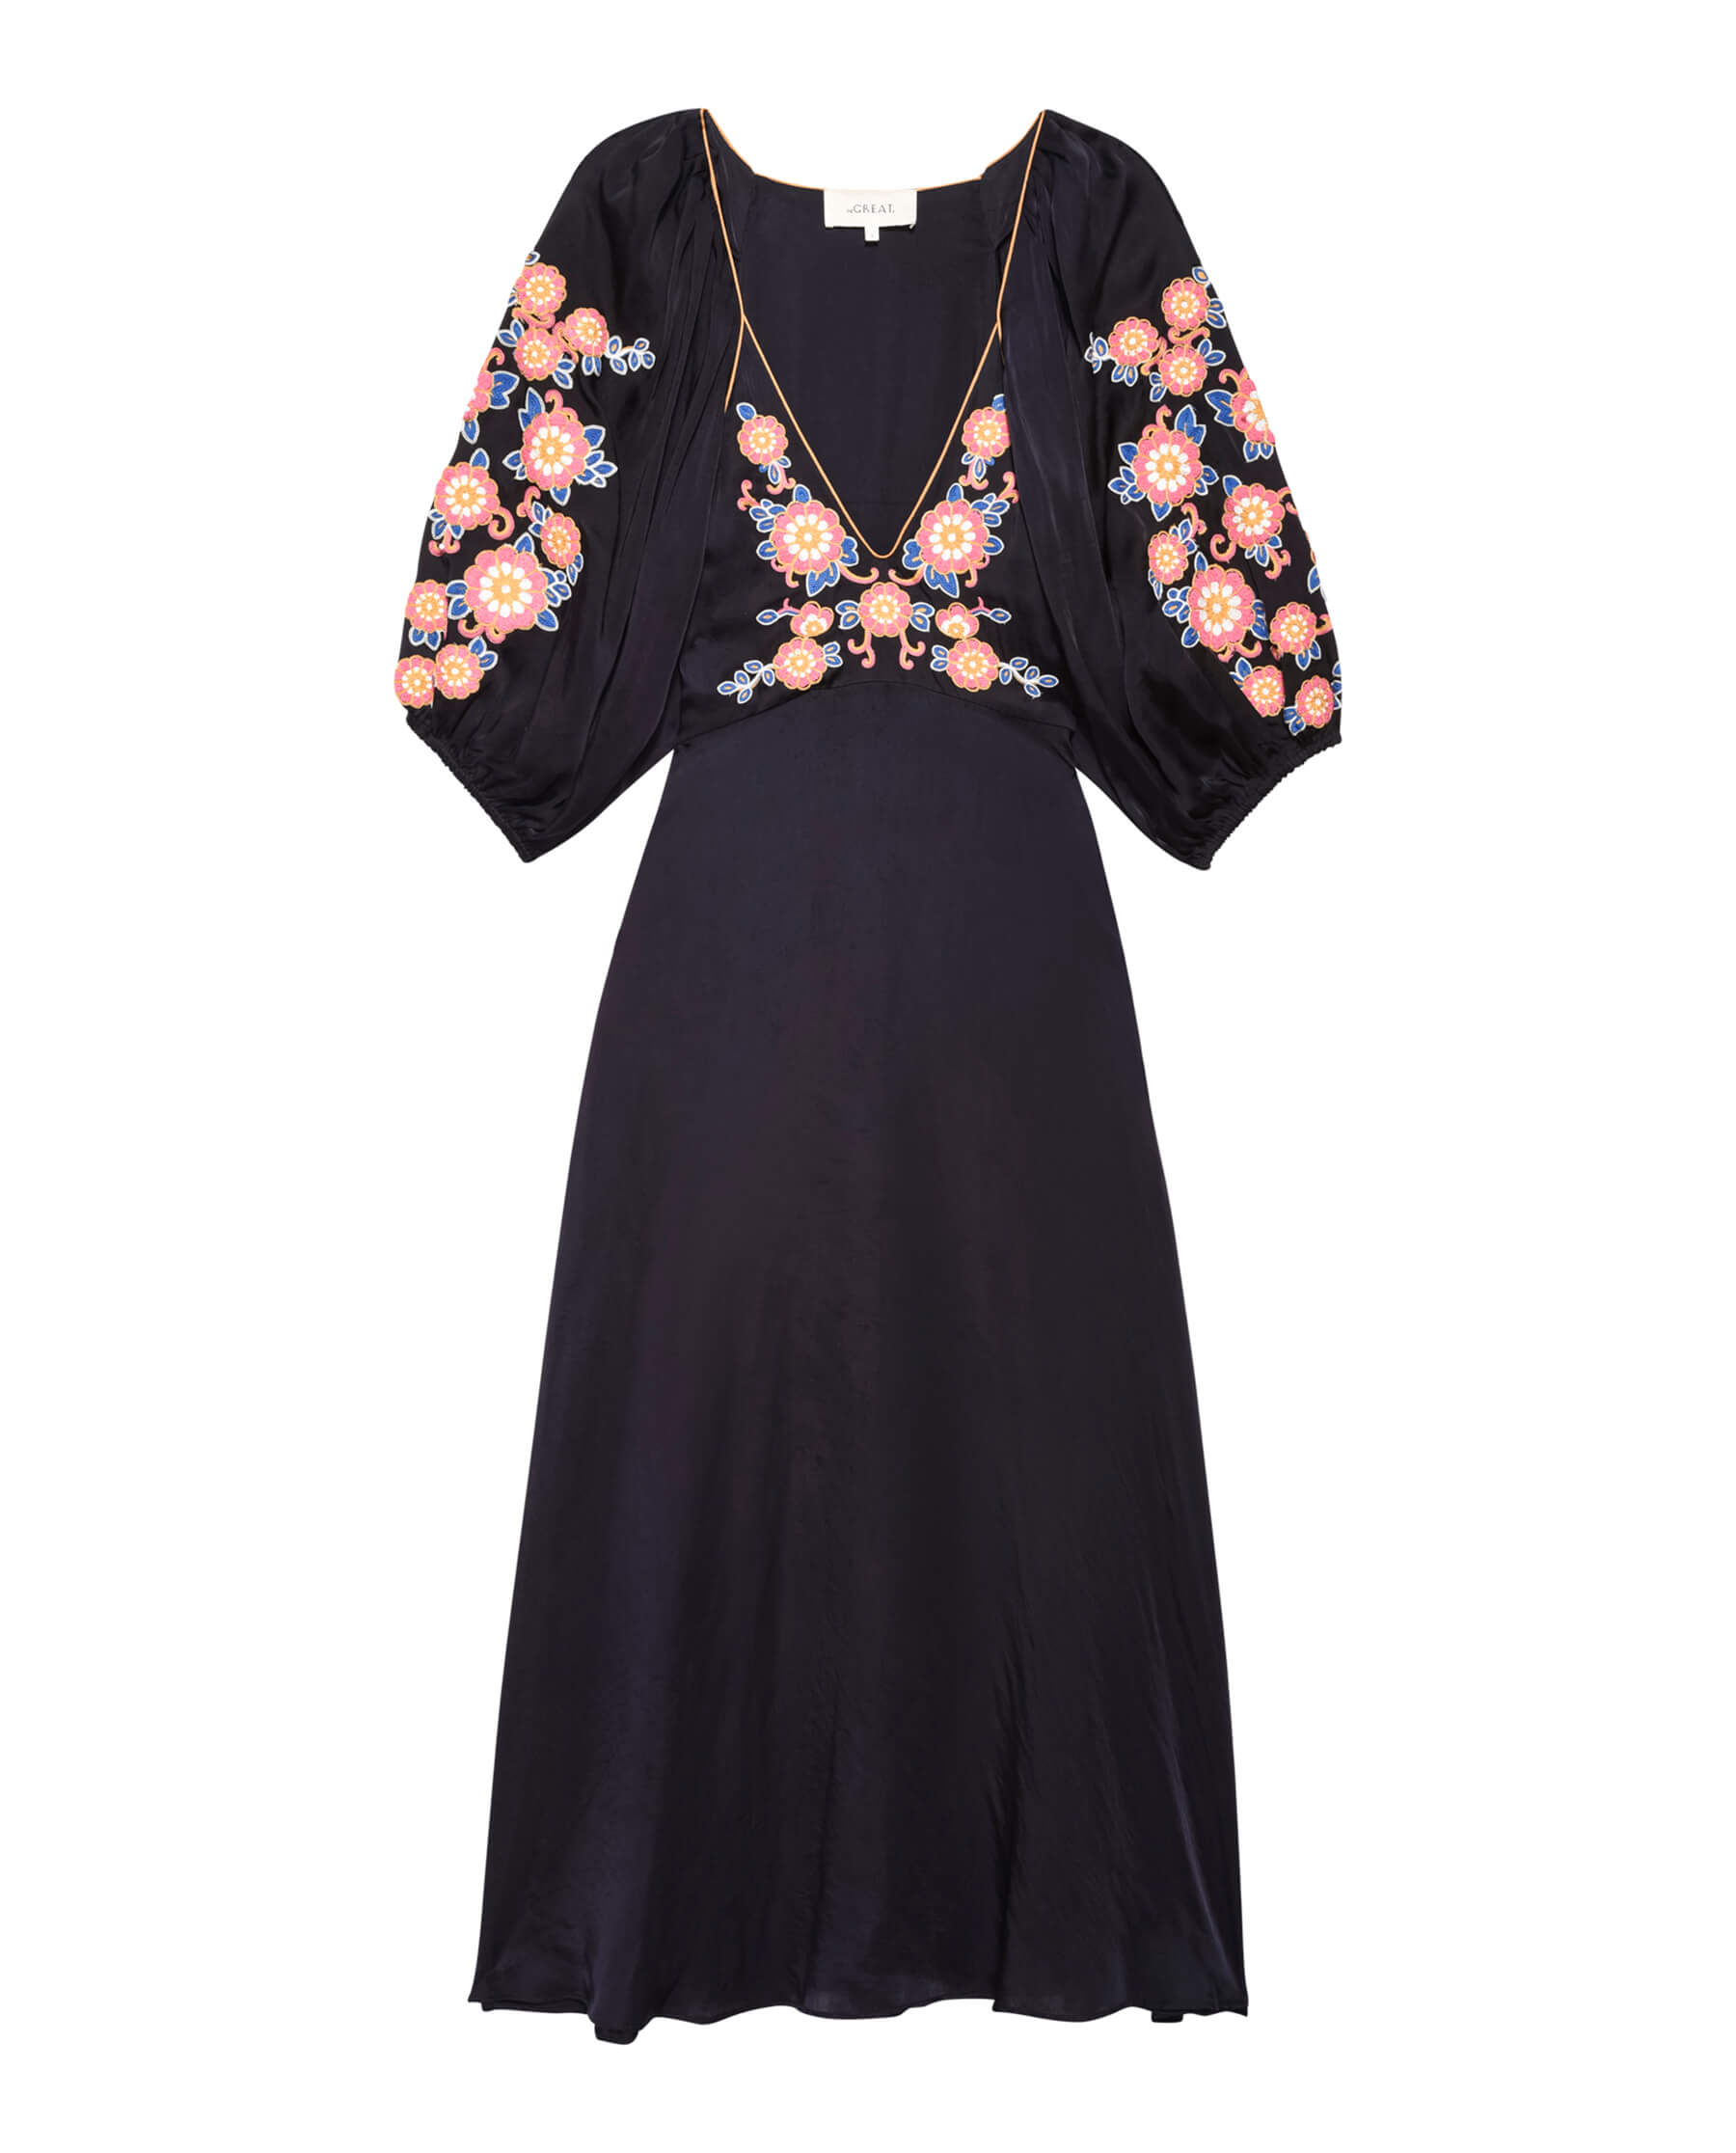 The Great Sagebrush Dress in Navy Country Floral Embroidery